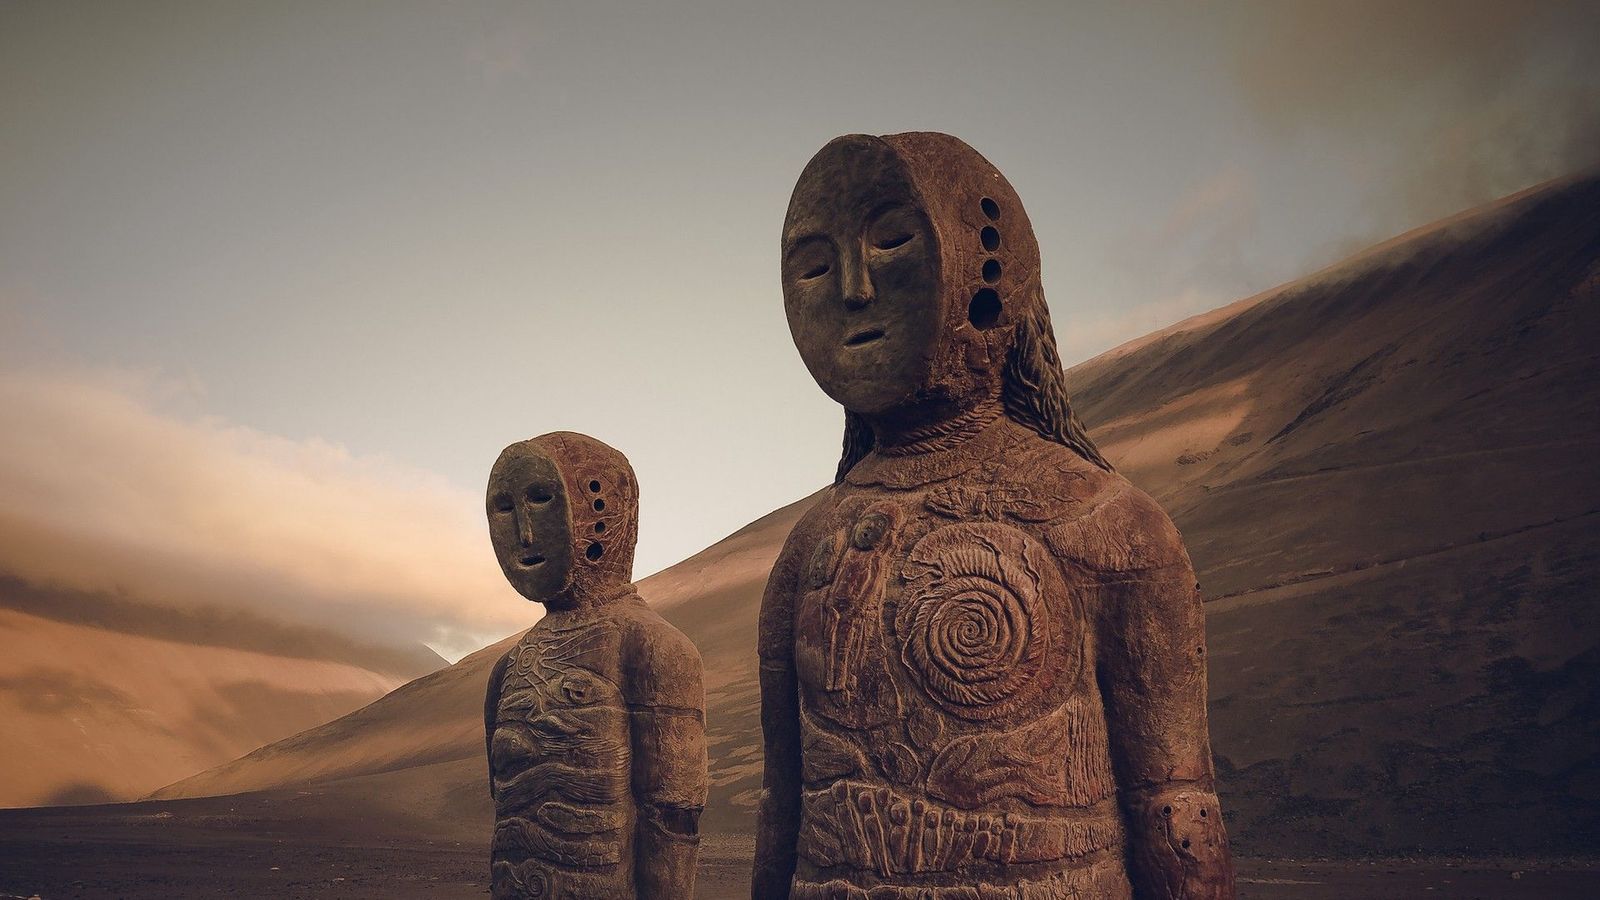 In Chile's Atacama Desert, the driest place on earth, evidence has been found of mummies that pre-date the Egyptians' by 2,000 years (Credit: Sergio Donoso/EyeEm/Getty Images)